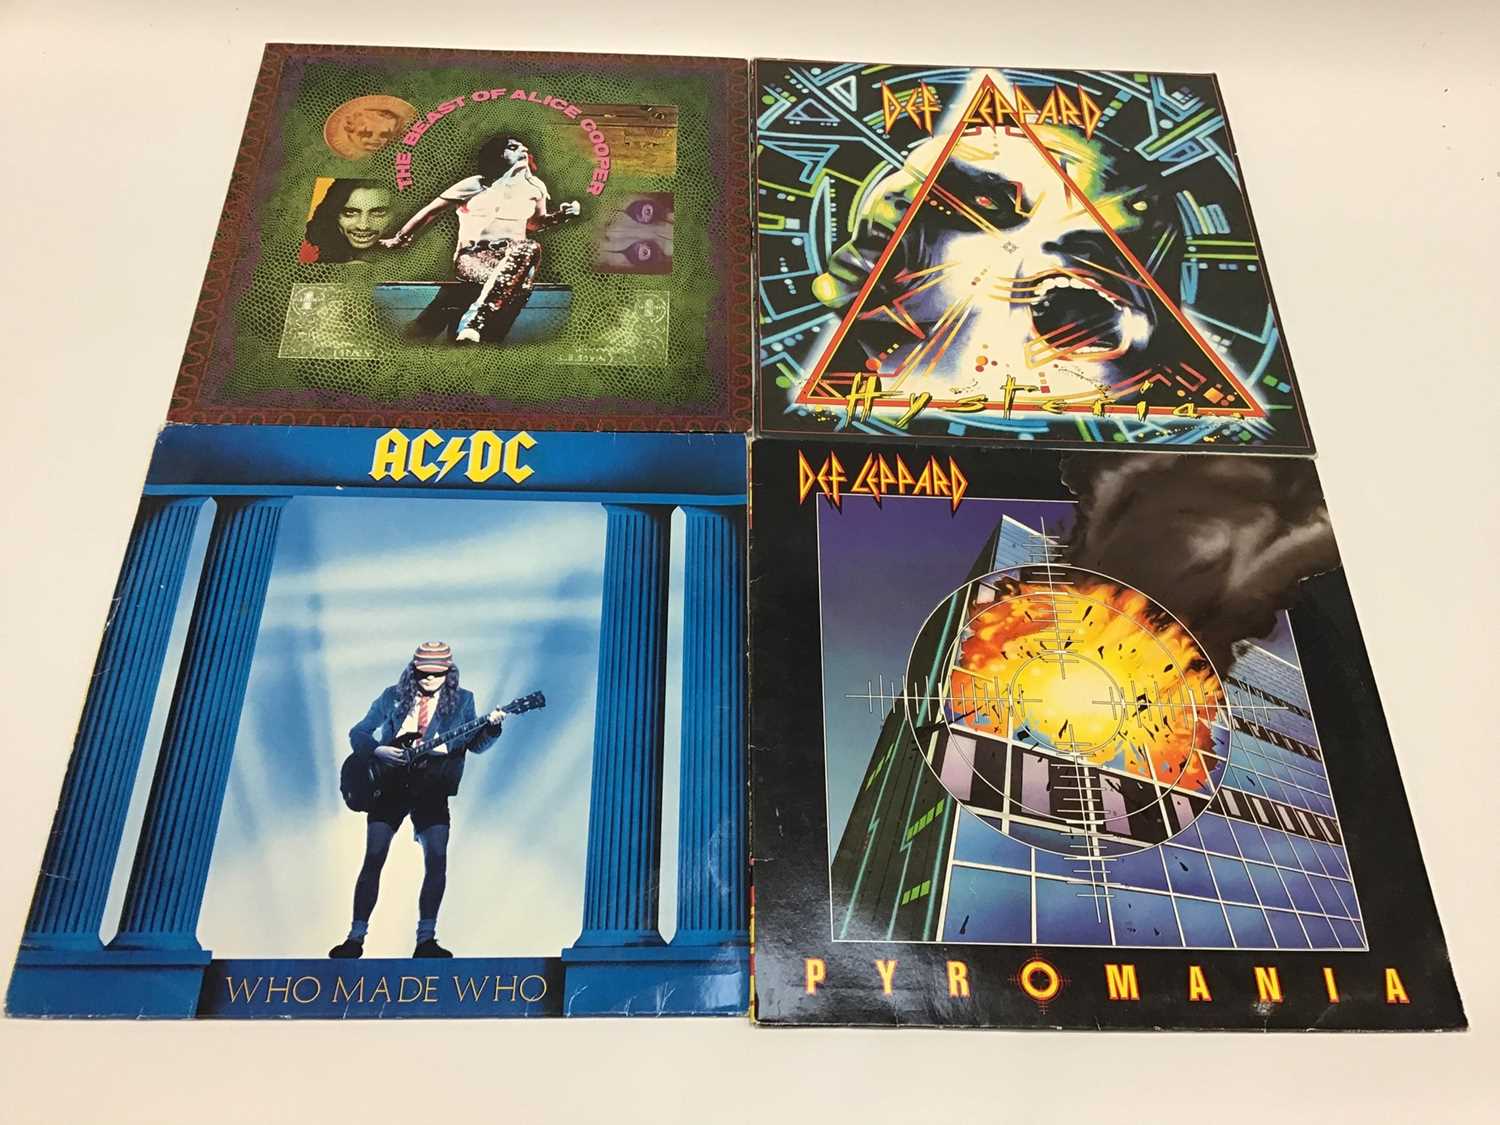 LP records including The Beatles, AC/DC, Alice Cooper and Carly Simon - Image 6 of 6